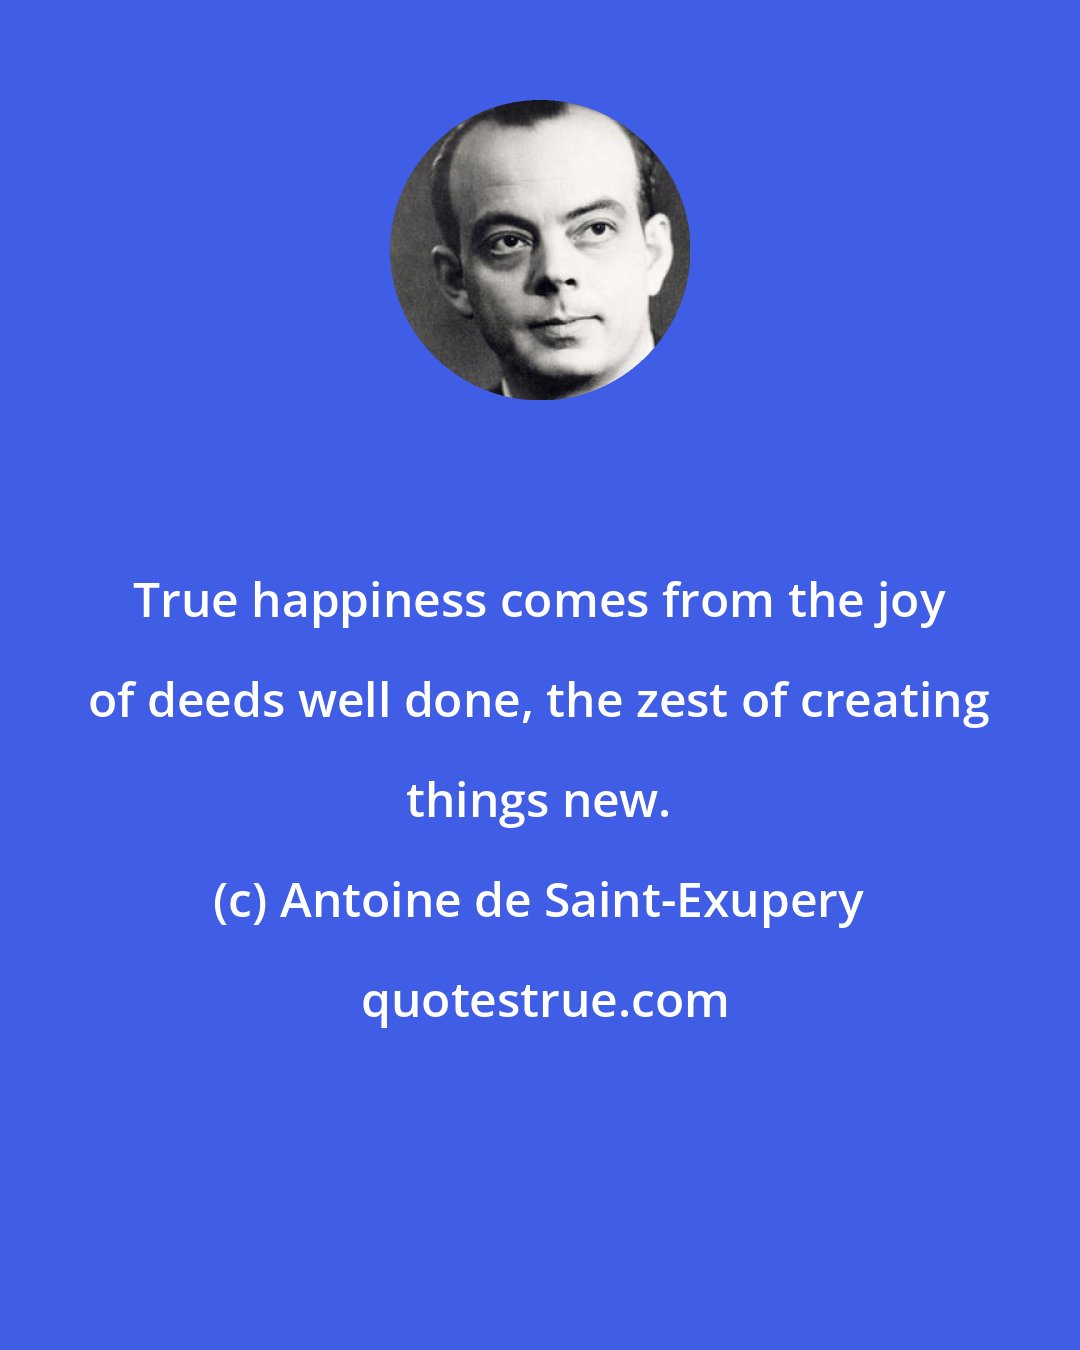 Antoine de Saint-Exupery: True happiness comes from the joy of deeds well done, the zest of creating things new.